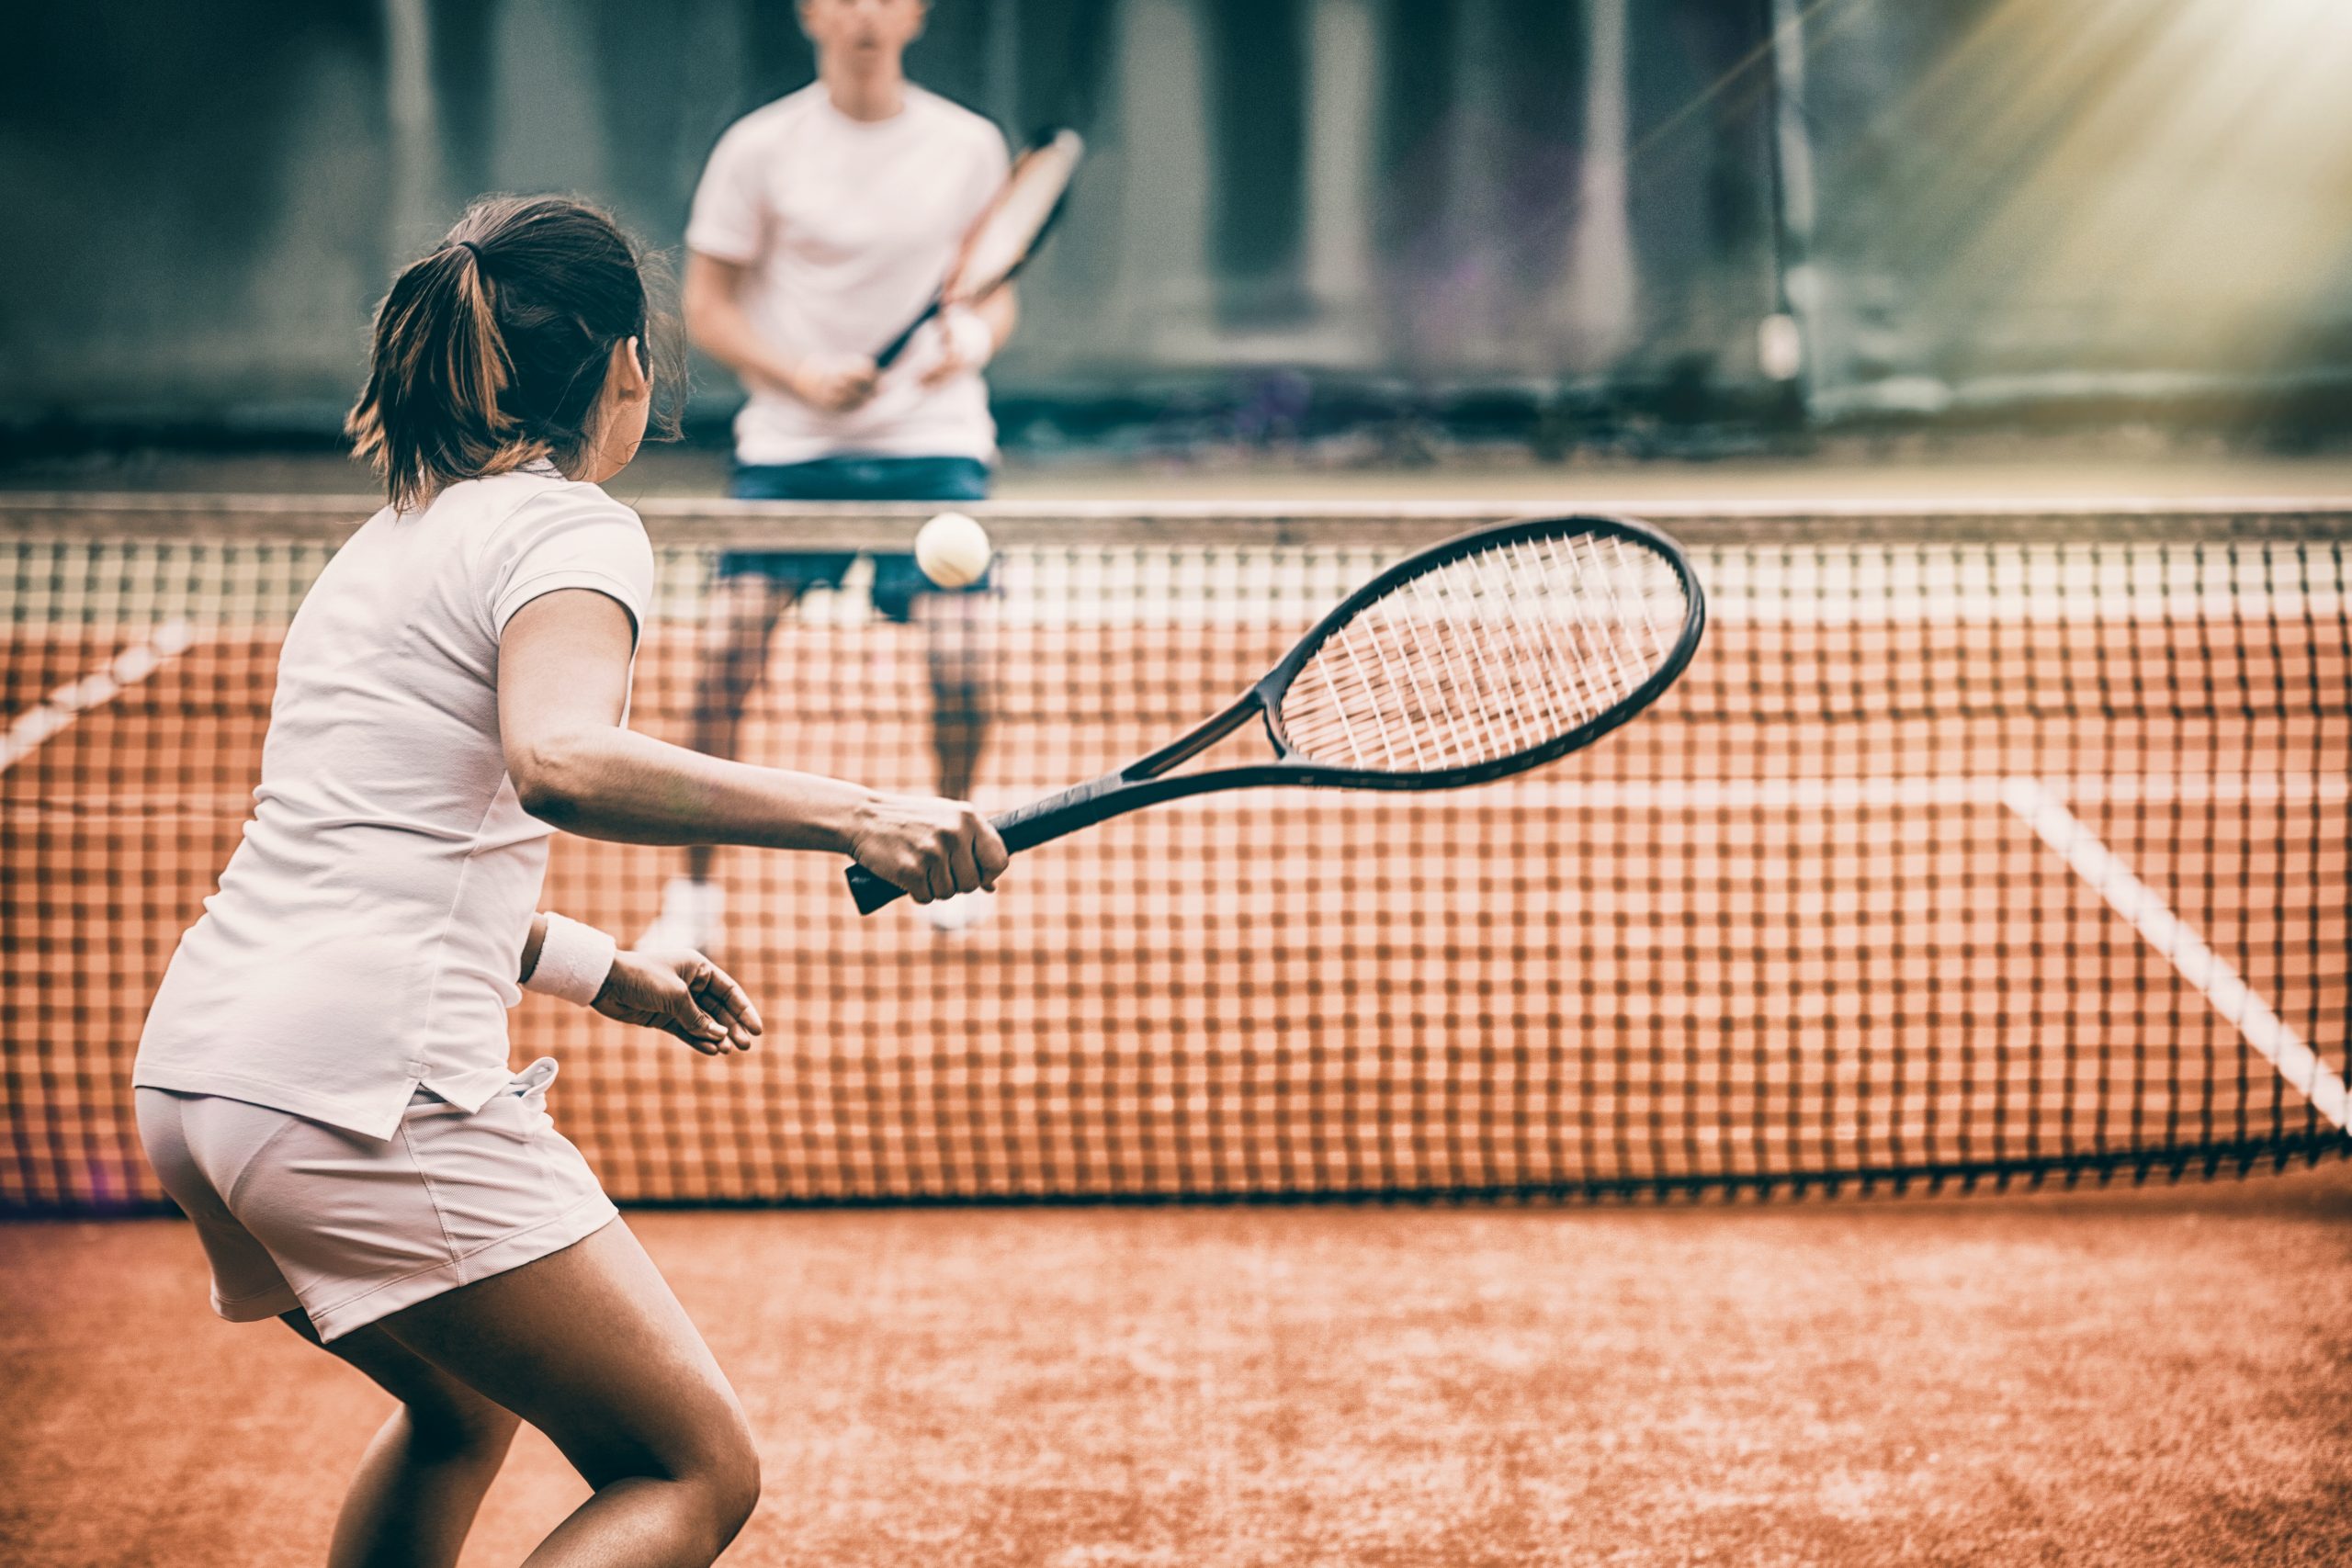 Tennis players playing a match on the court